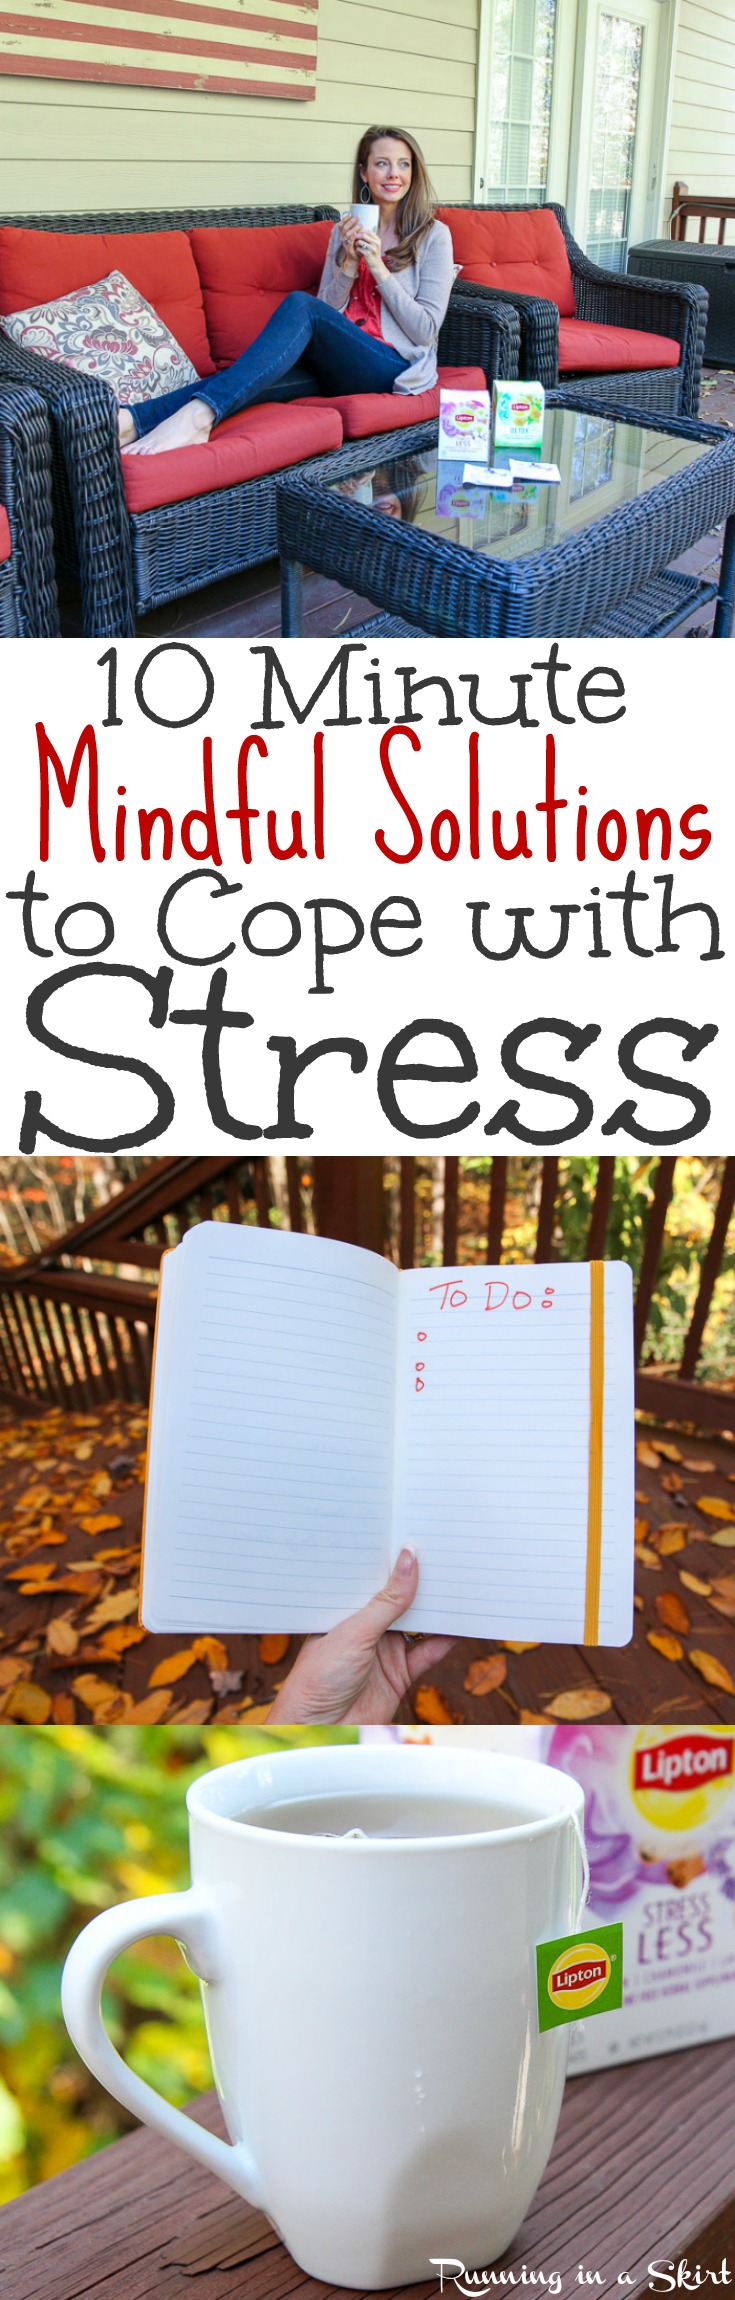 3 Mindful Steps to Cope with Stress and Anxiety including self care tips, activities and meditation to calm the mind and stay healthy. / Running in a Skirt via @juliewunder